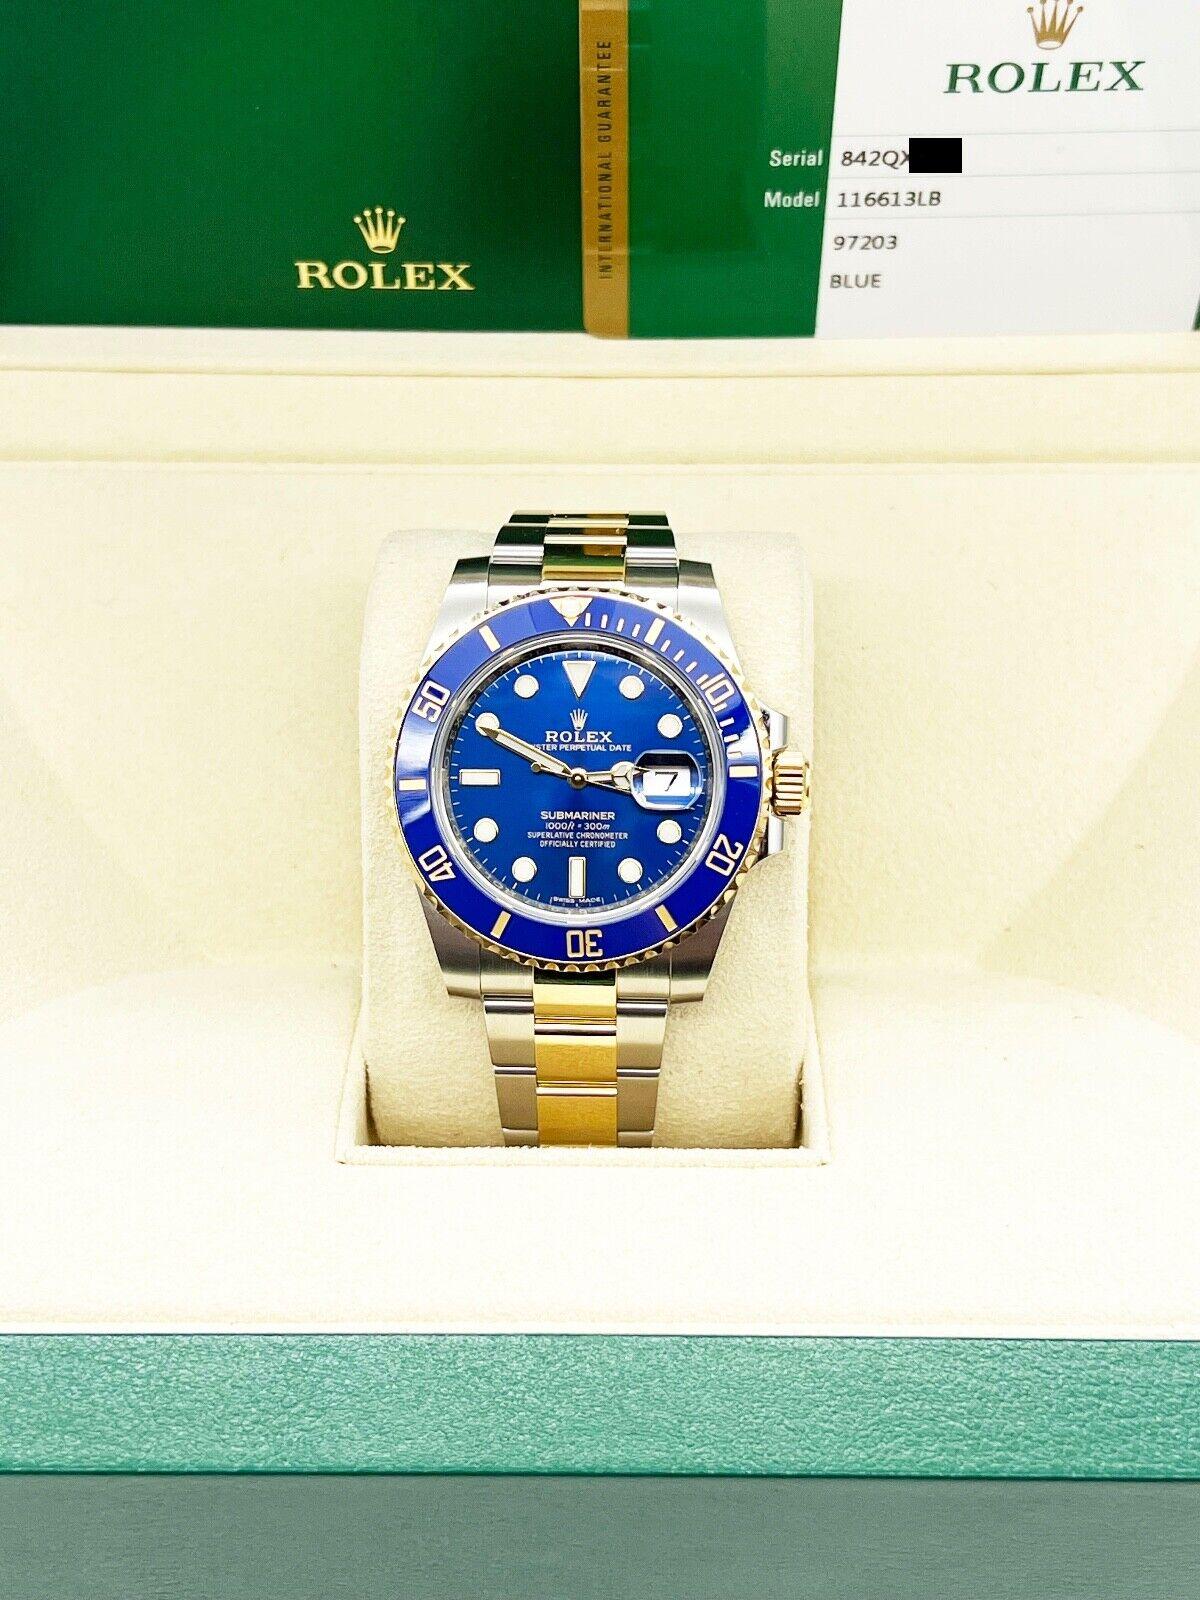 2020 Rolex Submariner 116613 Blue Ceramic 18K Yellow Gold Stainless Box Paper For Sale 2